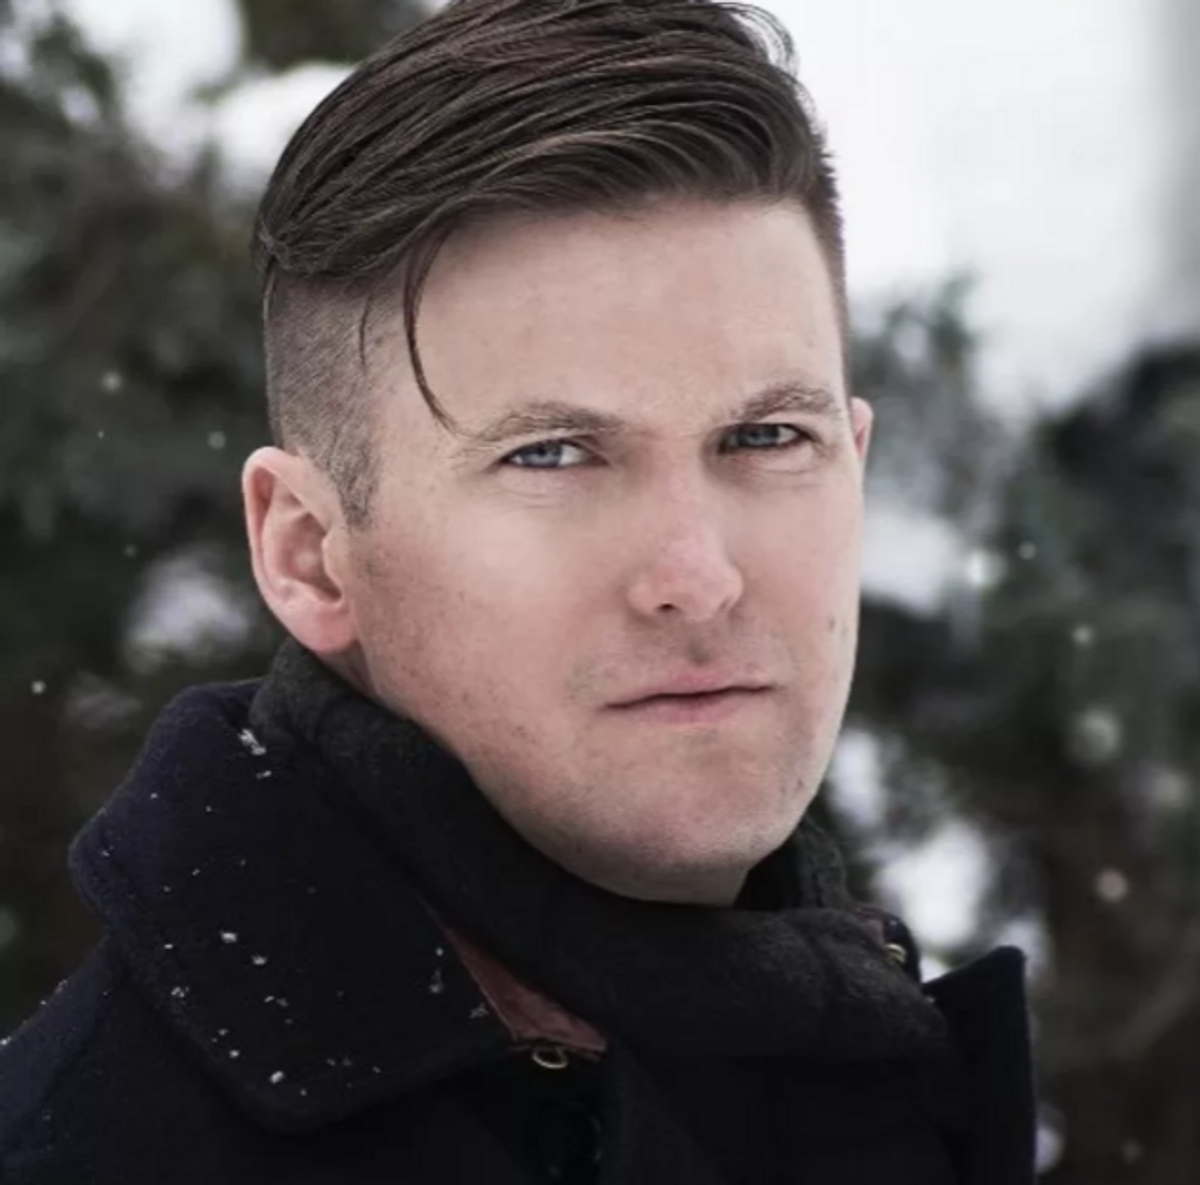 Inspiring! Richard Spencer Can Get Punched To Every Musical Rhythm That Exists